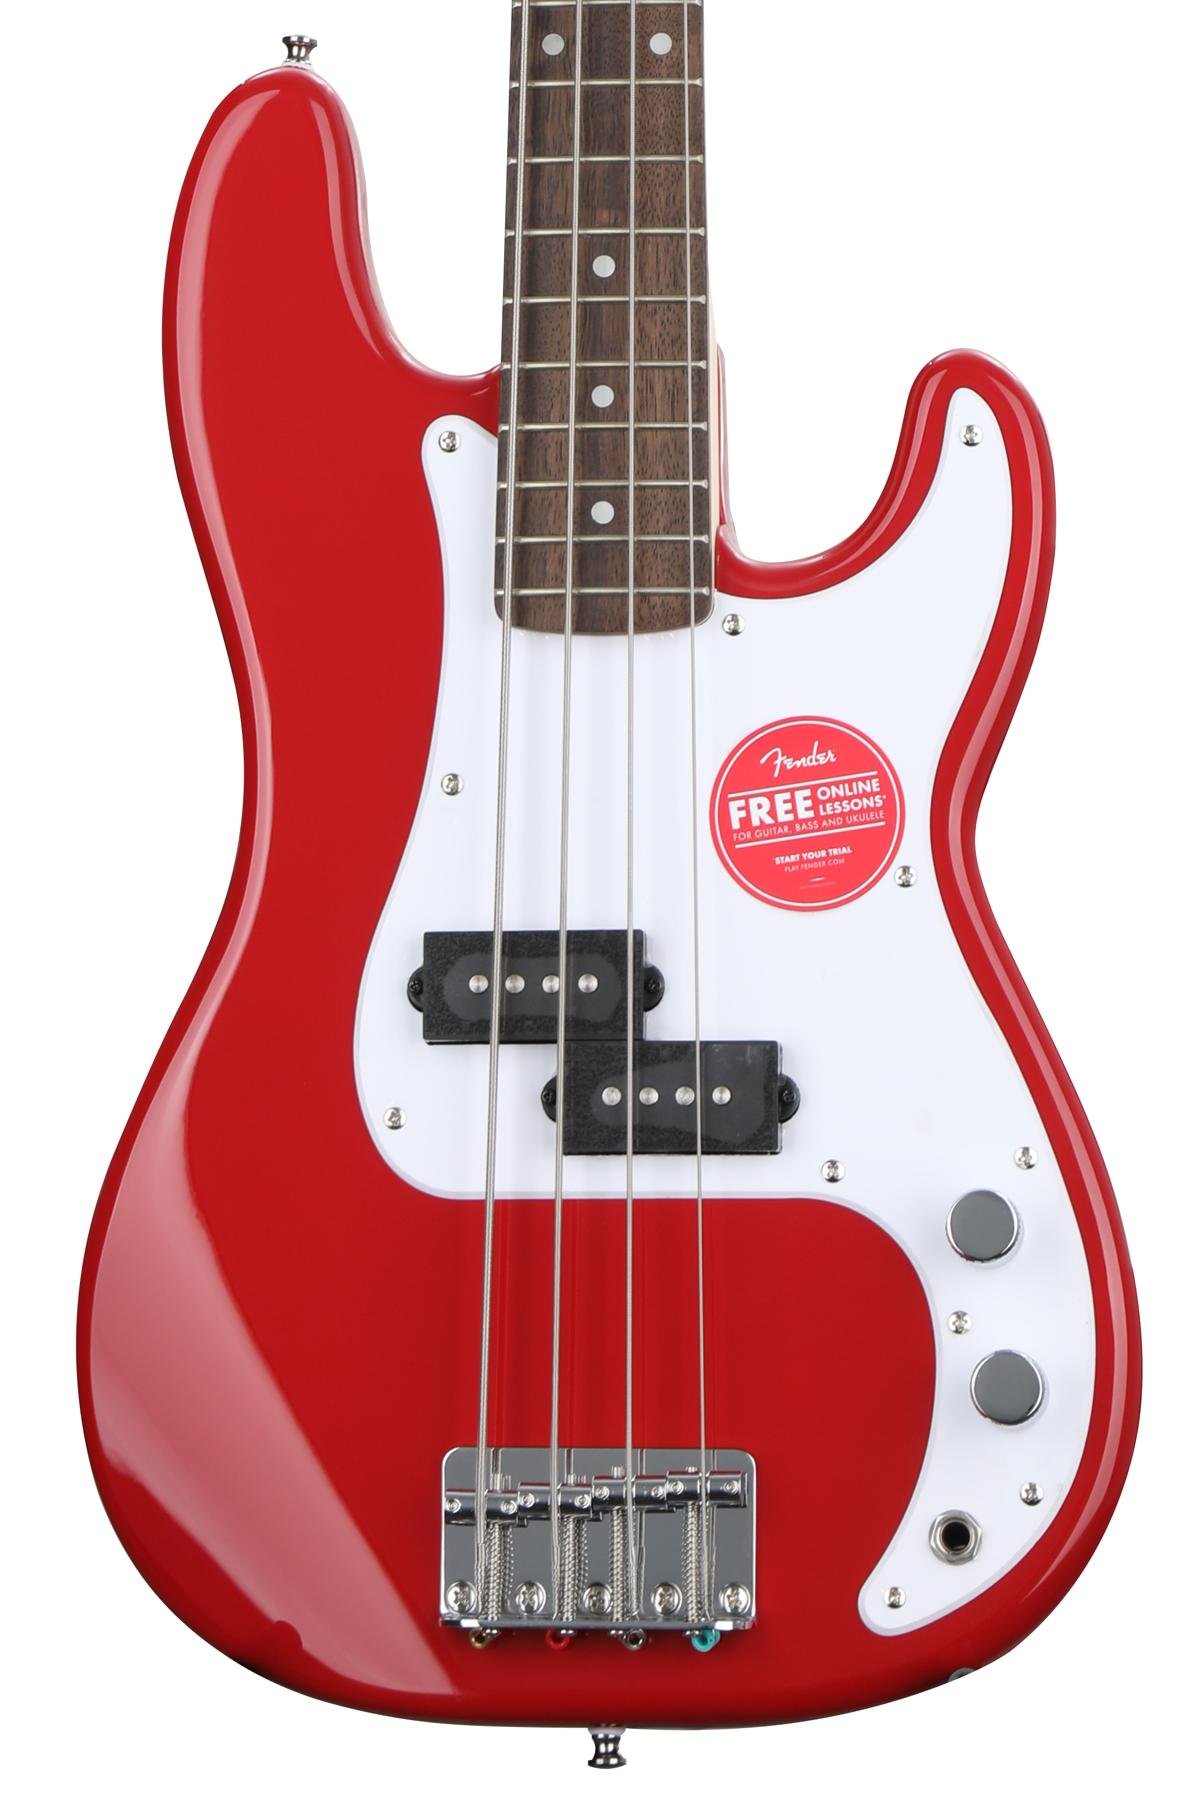 MiNi 4string ukulele electric bass with red color